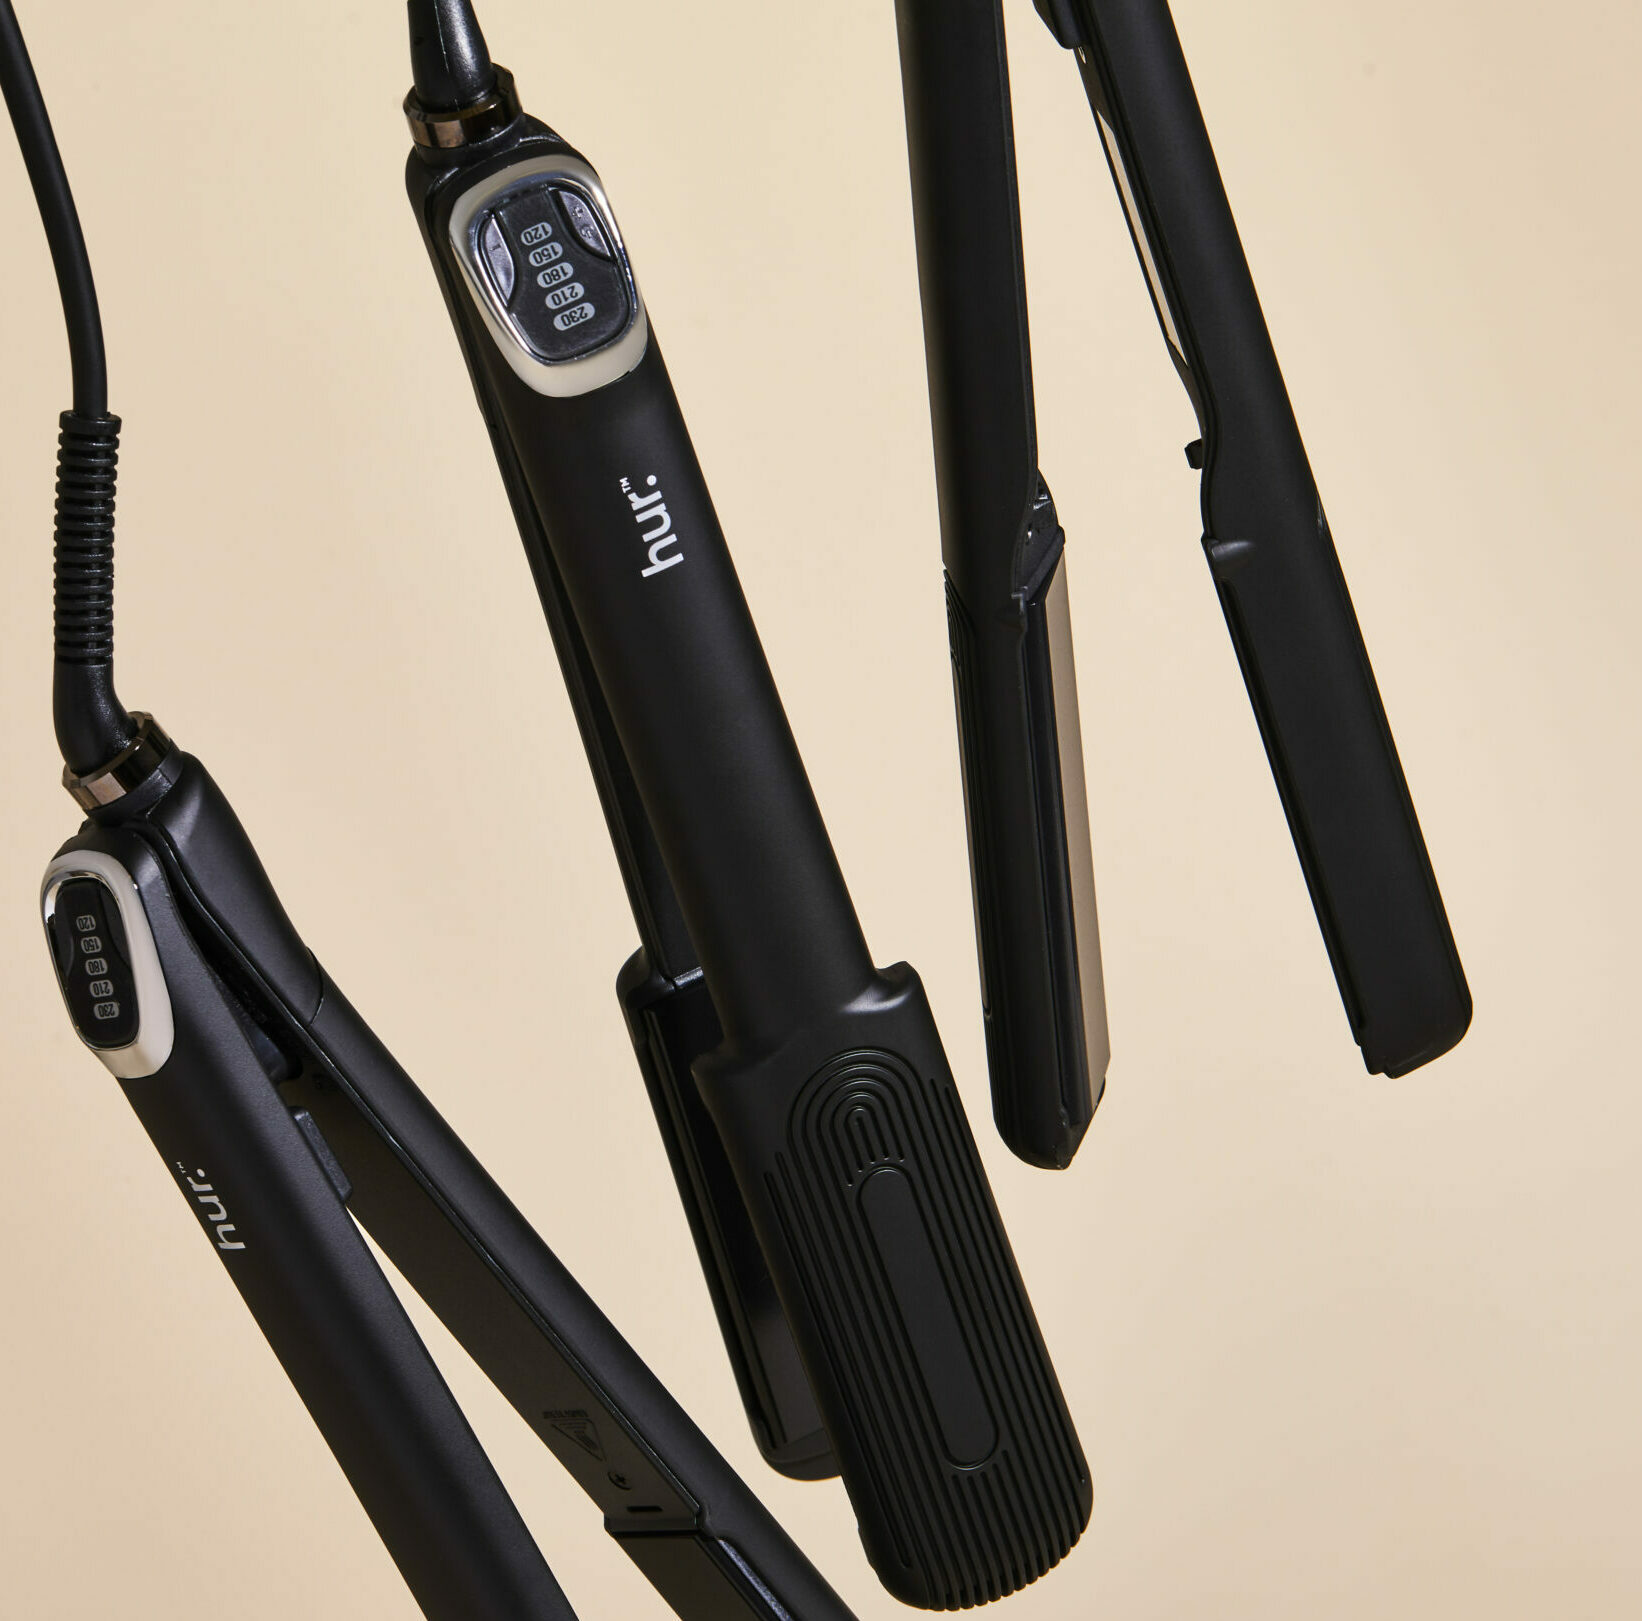 product images of 3 hair straighteners